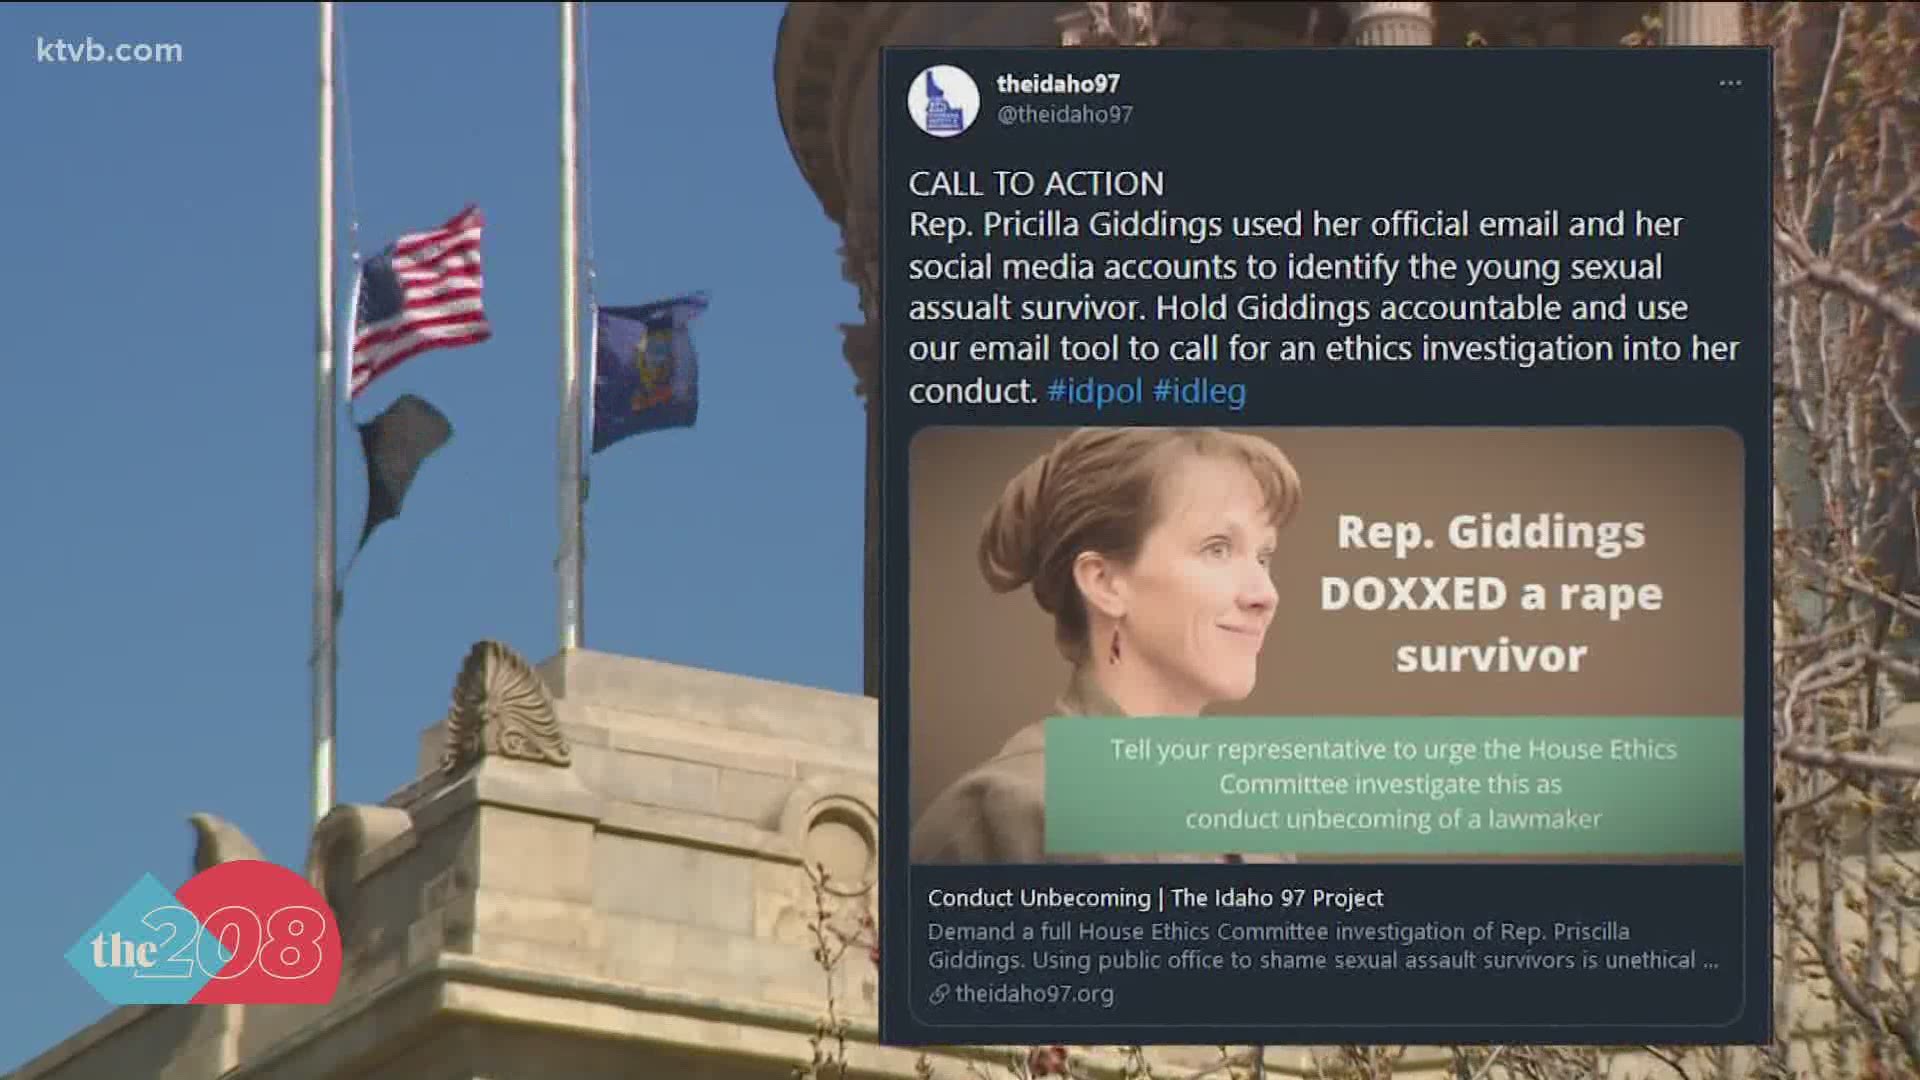 The Idaho 97 Project is calling on Idaho lawmakers to investigate the conduct of Rep. Giddings after she shared links identifying an alleged sexual assault victim.